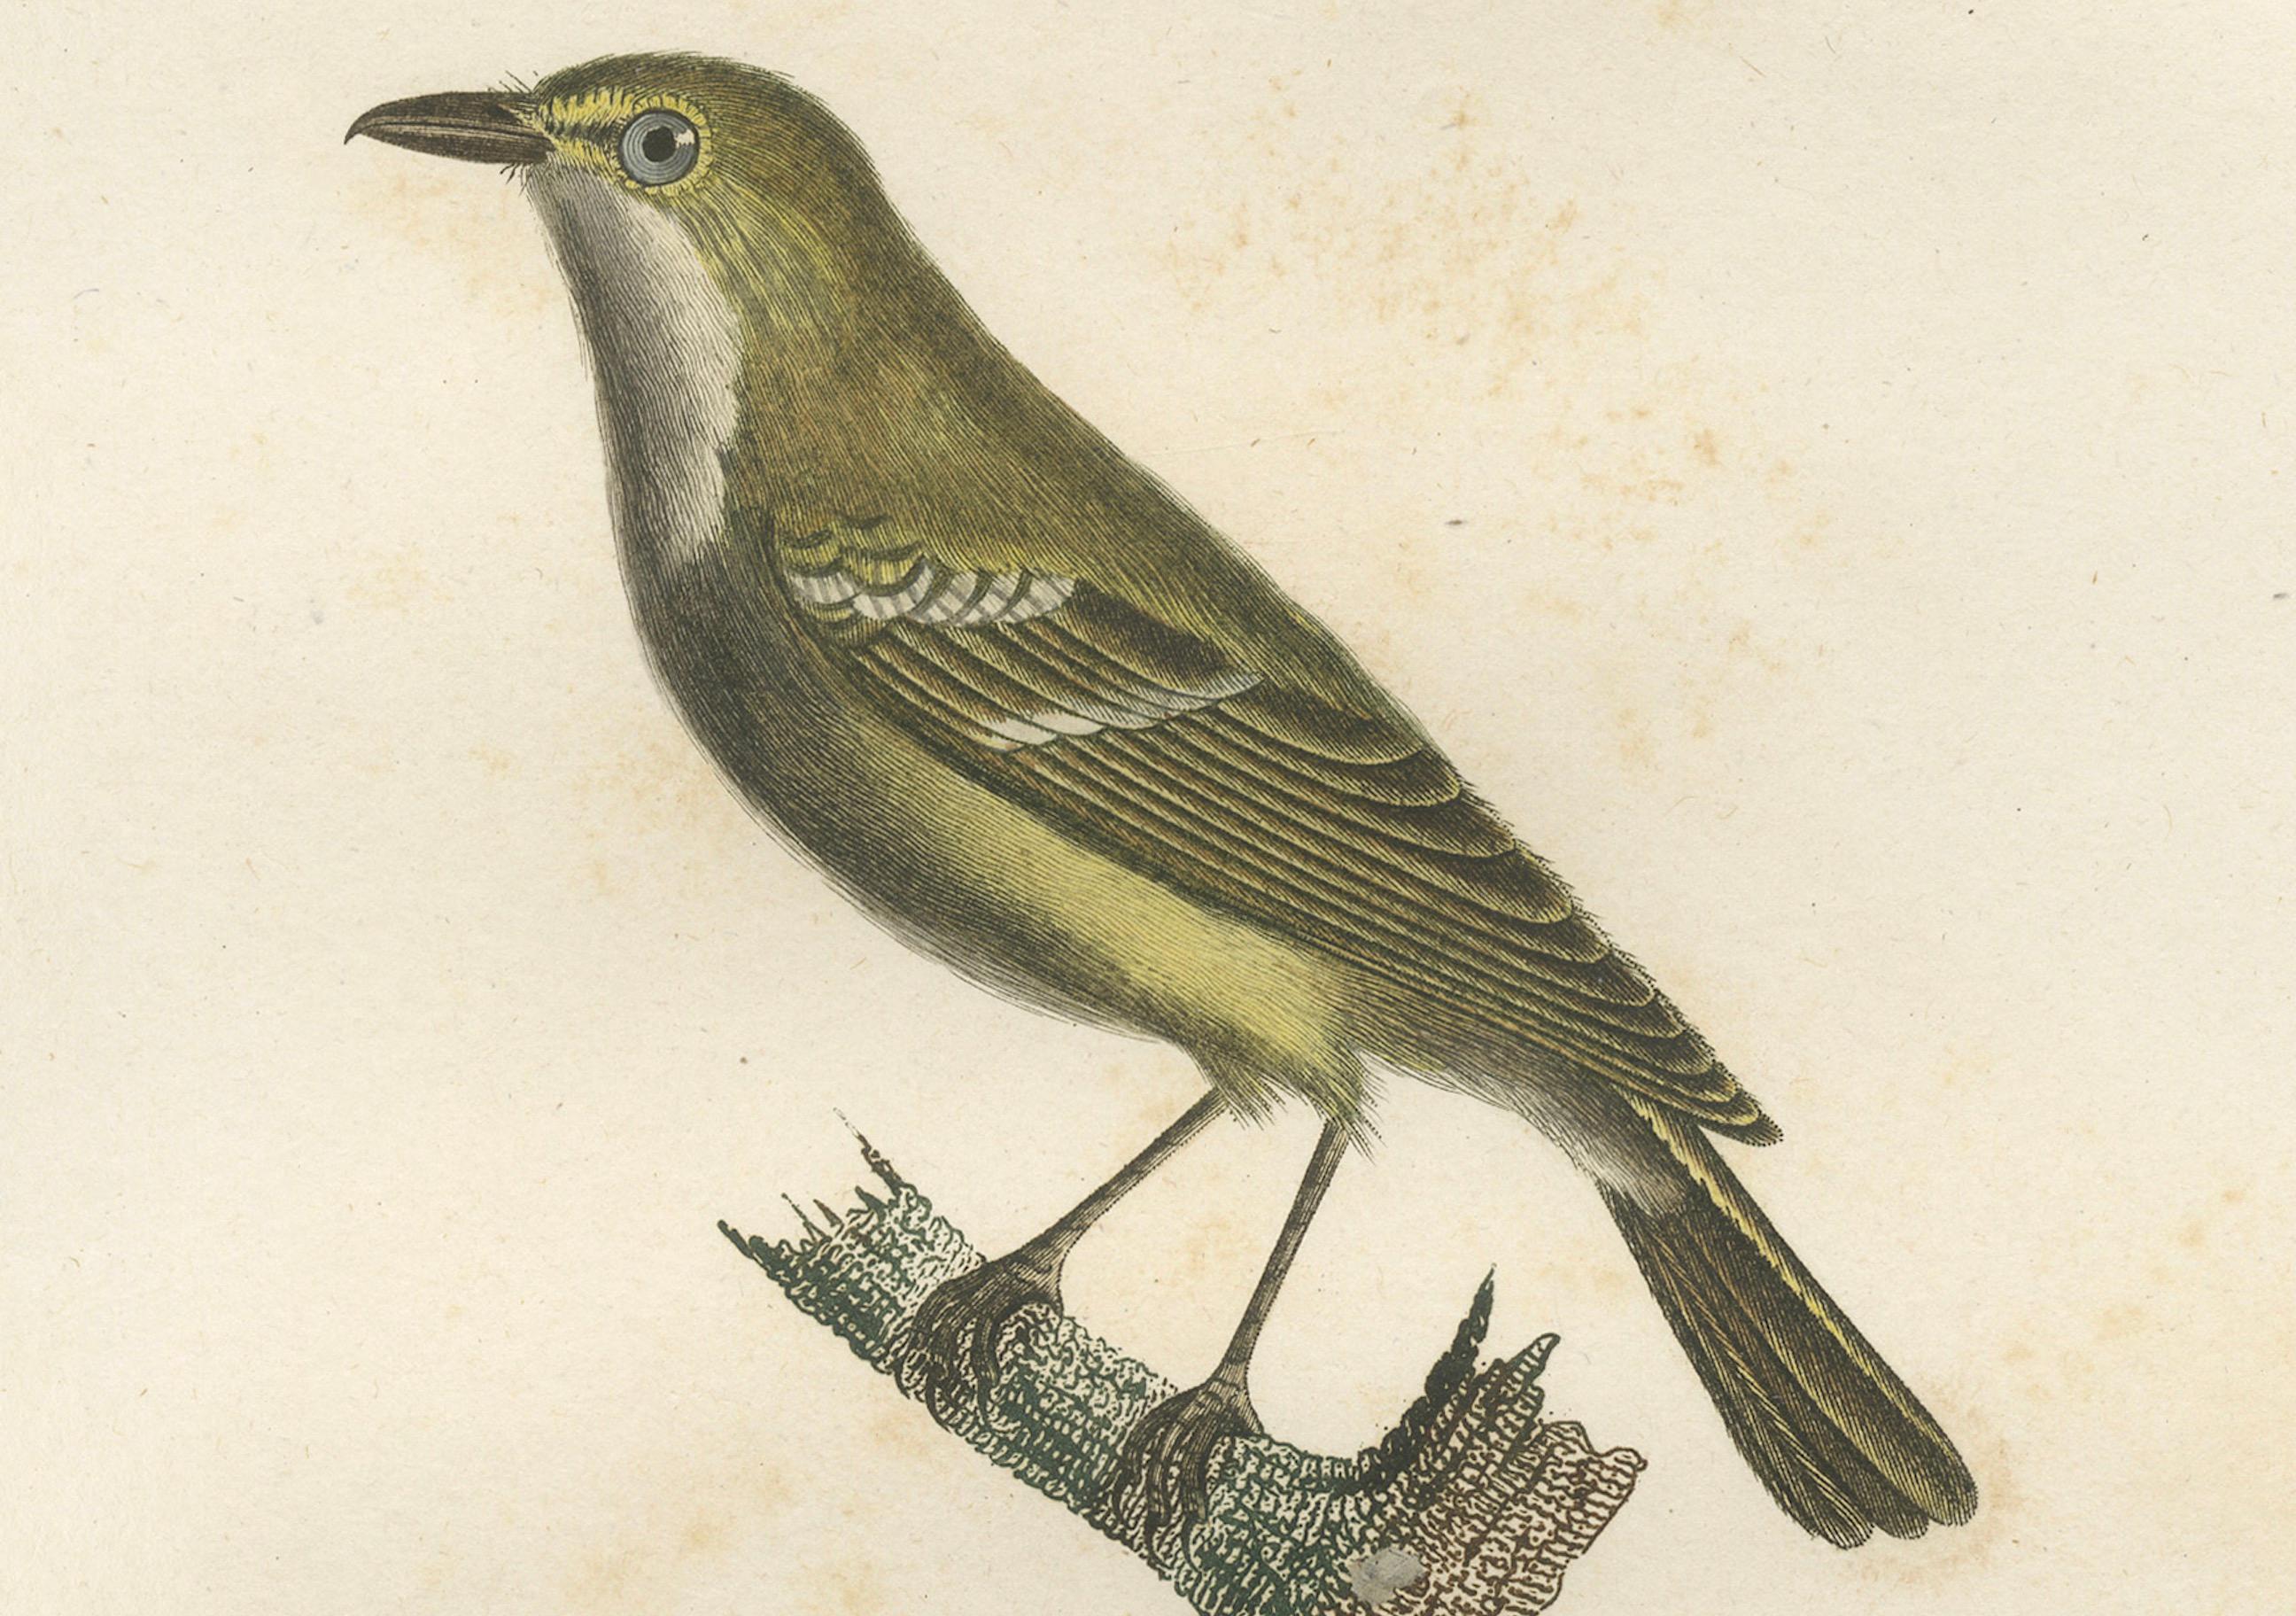 Paper Large Antique Vireo Bird Illustration - 1807 Vieillot Handcolored Print For Sale